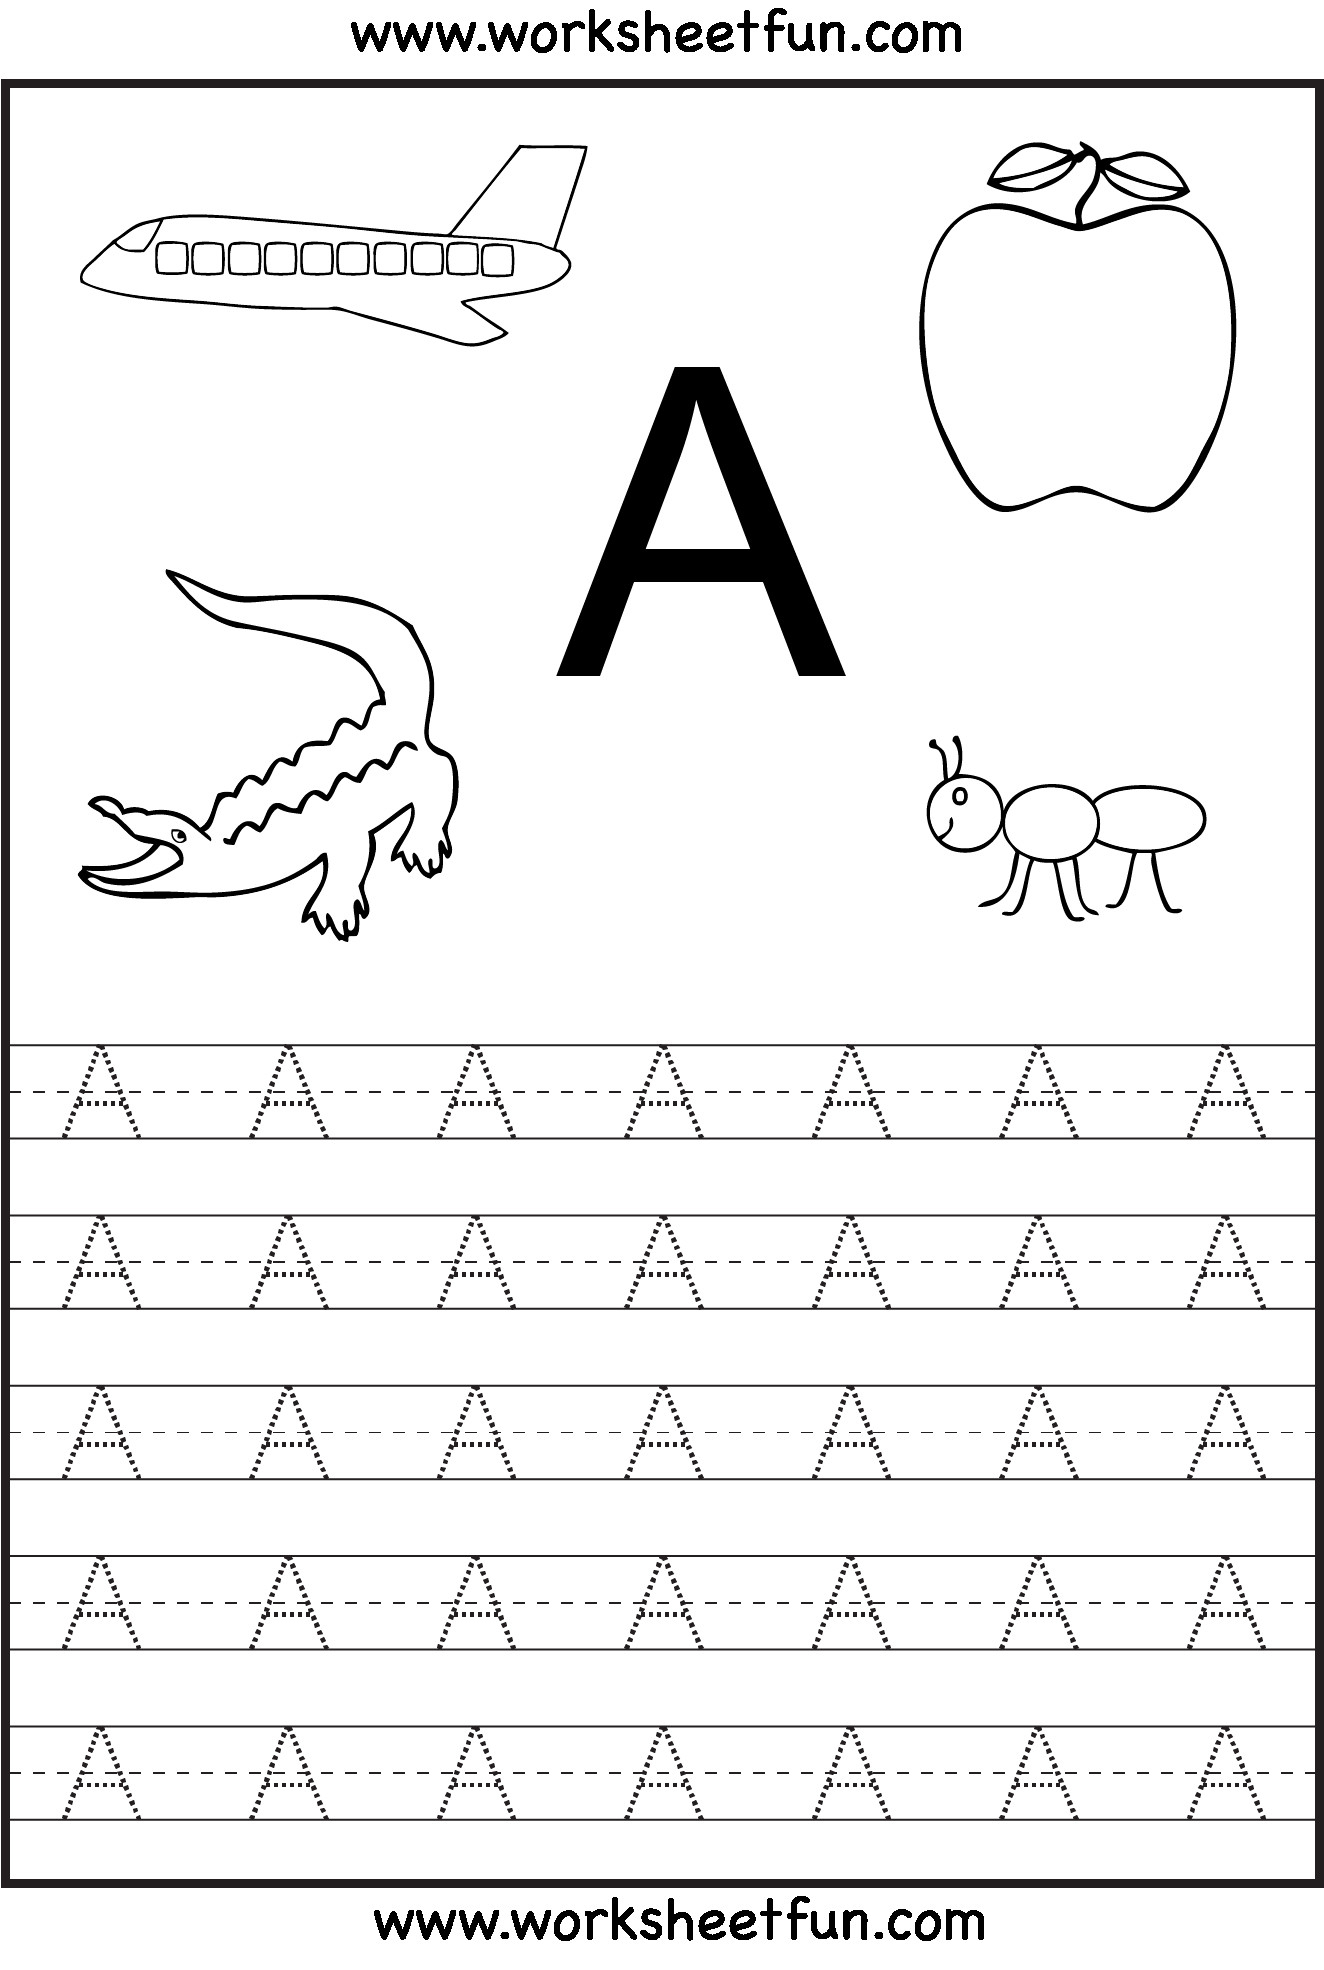 Abc Worksheets For 3 Year Olds | Printable Worksheets And pertaining to Letter B Worksheets For 3 Year Olds